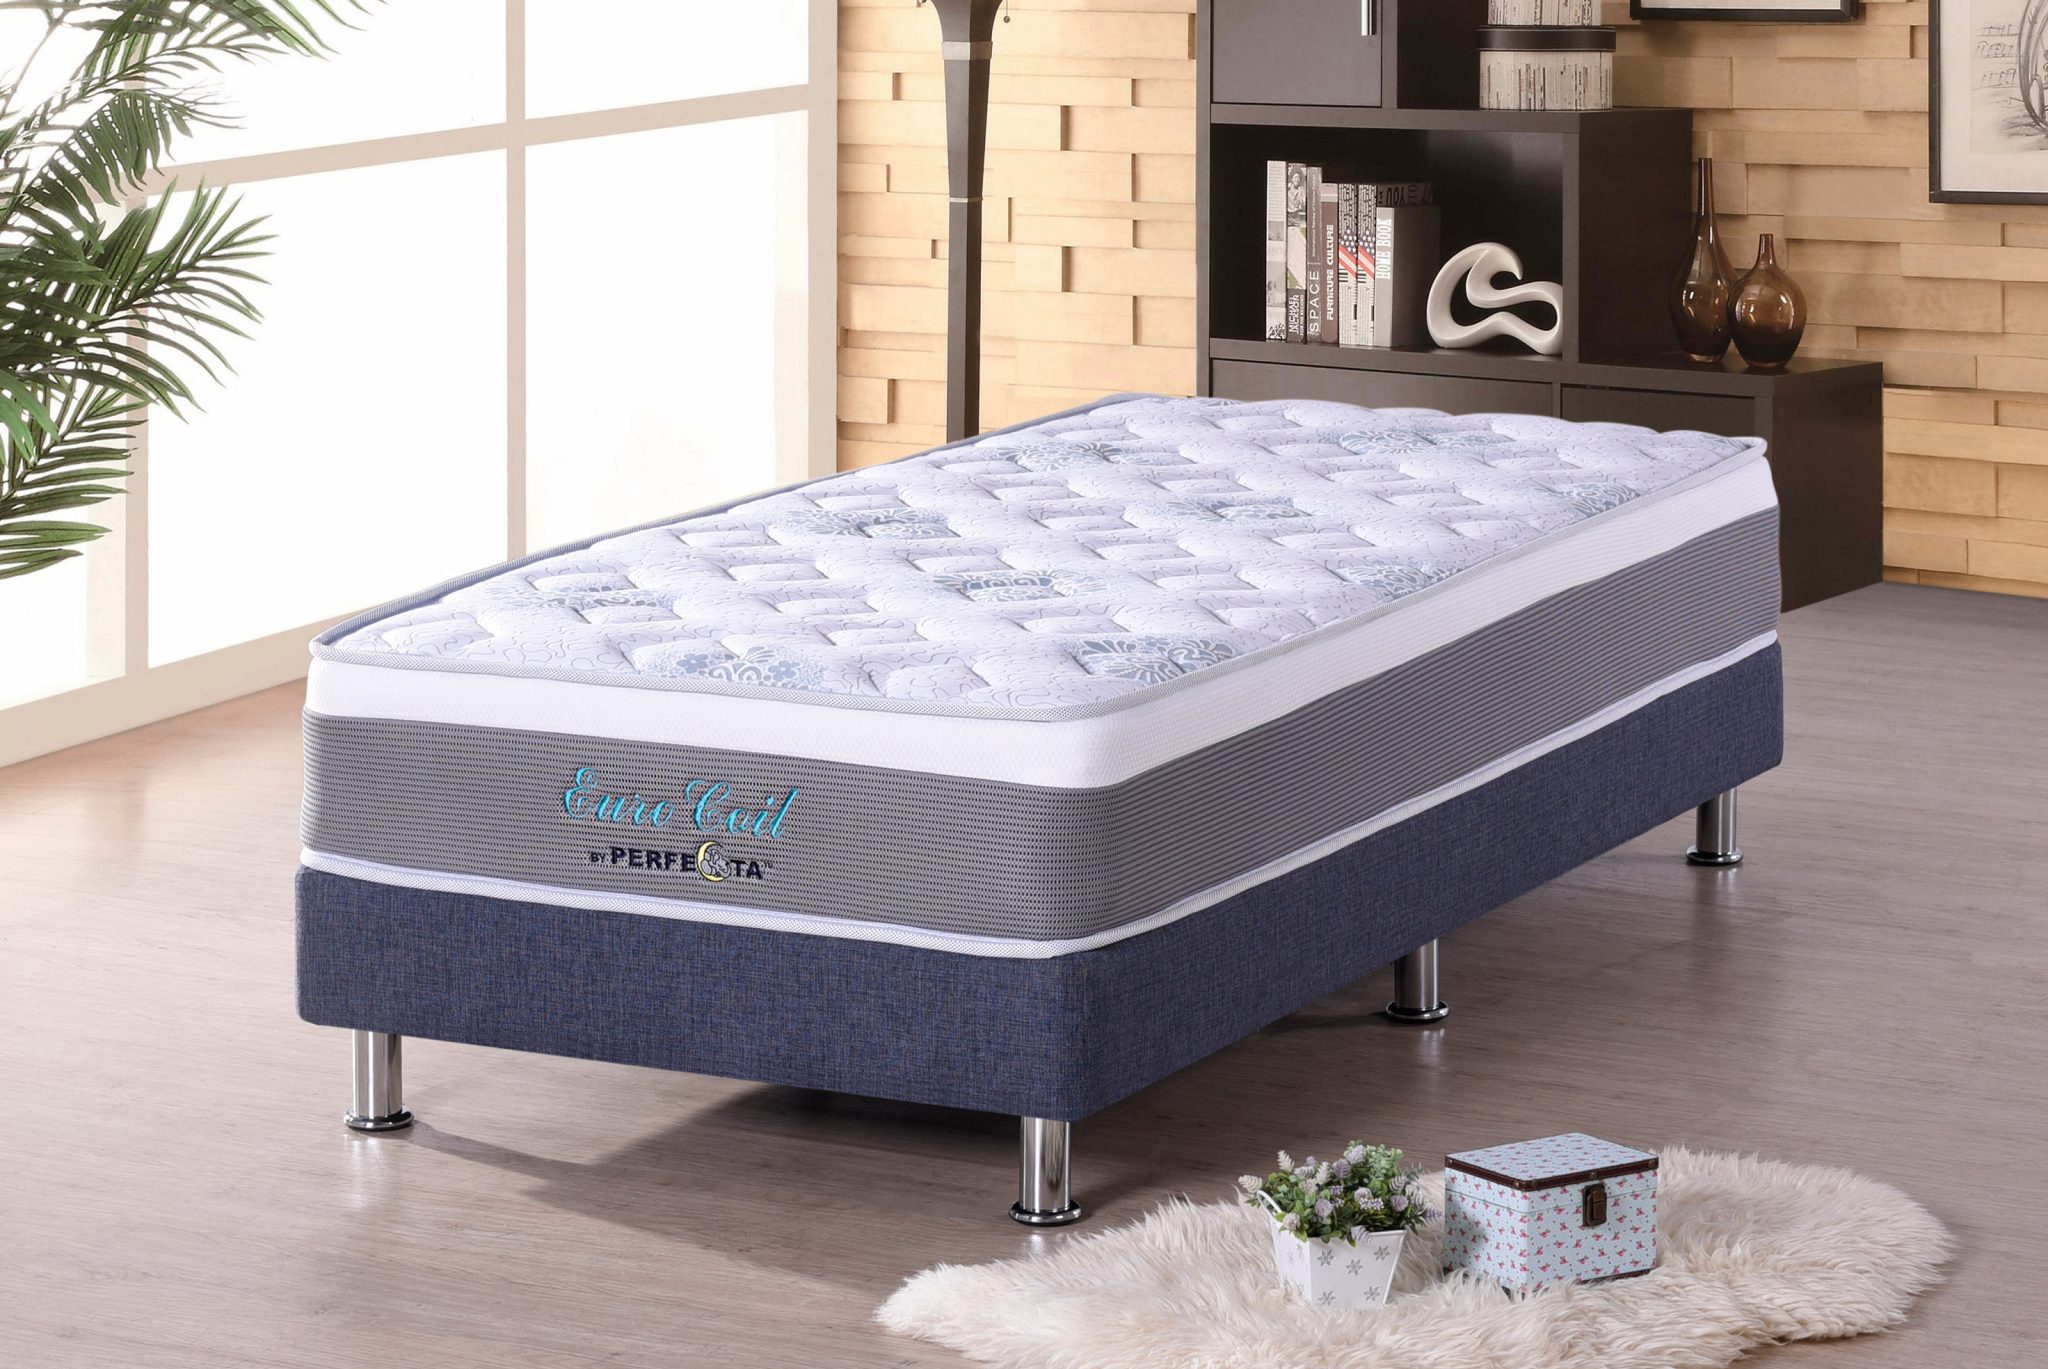 euro coil spinal care mattress review